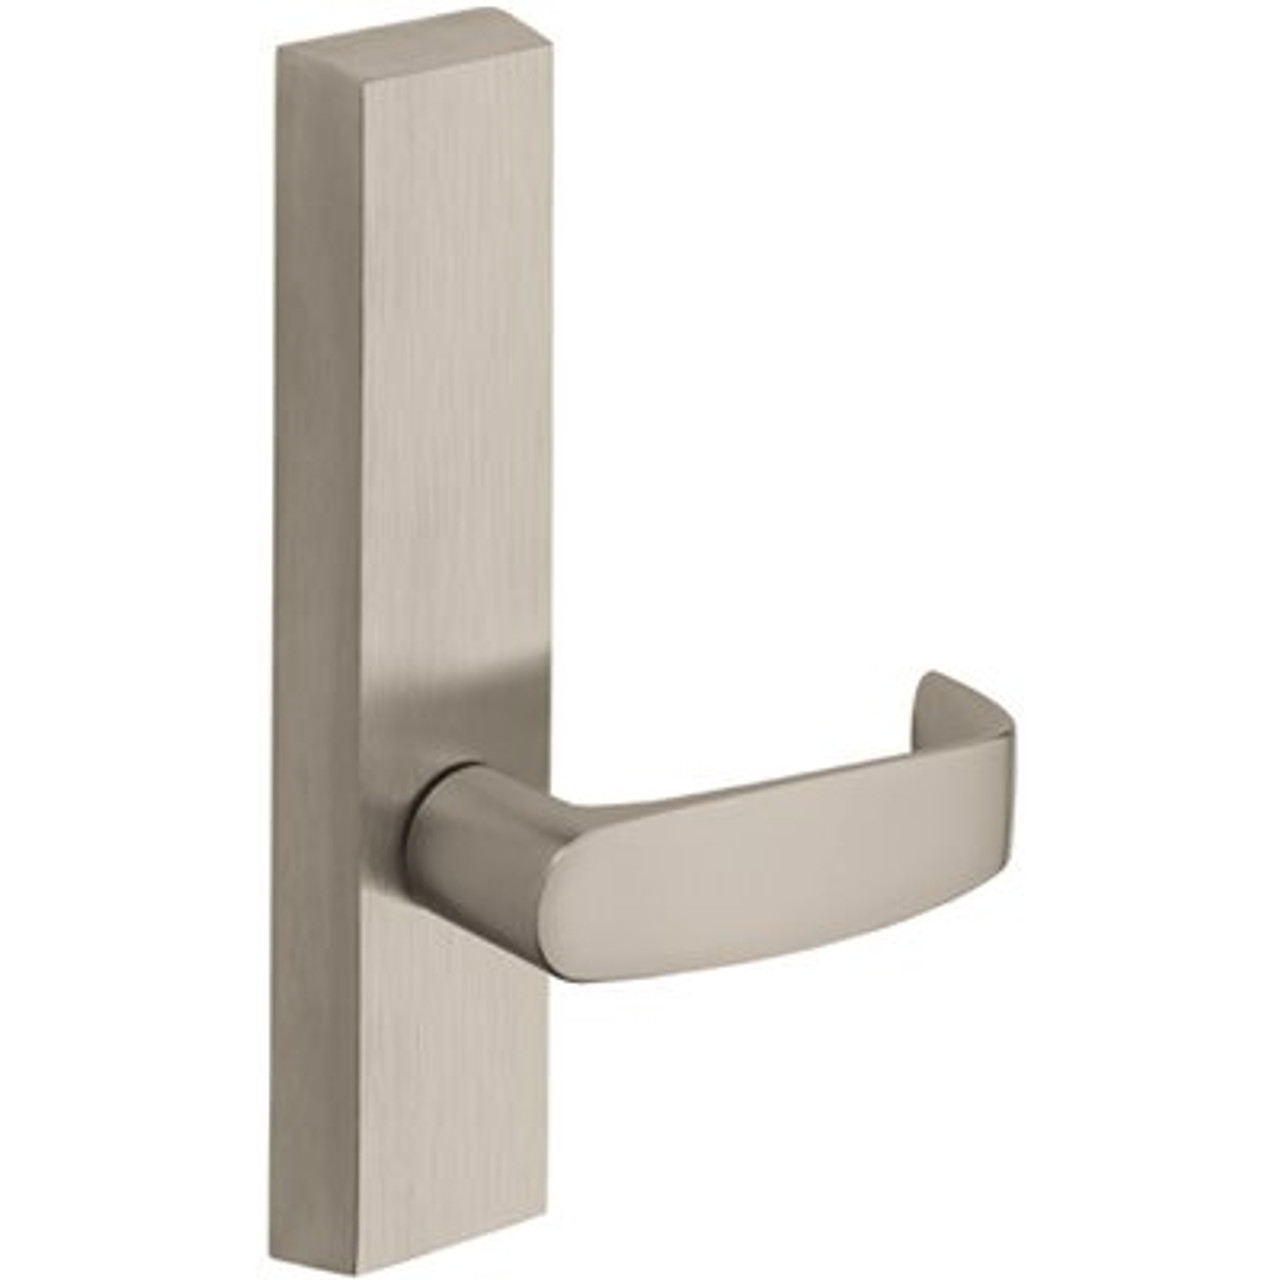 Sargent 700 Series Exit Trim, L-Handle For Use With Concealed 80 Series Exit Device, Passage, Satin Chrome, Keyless, Lhr